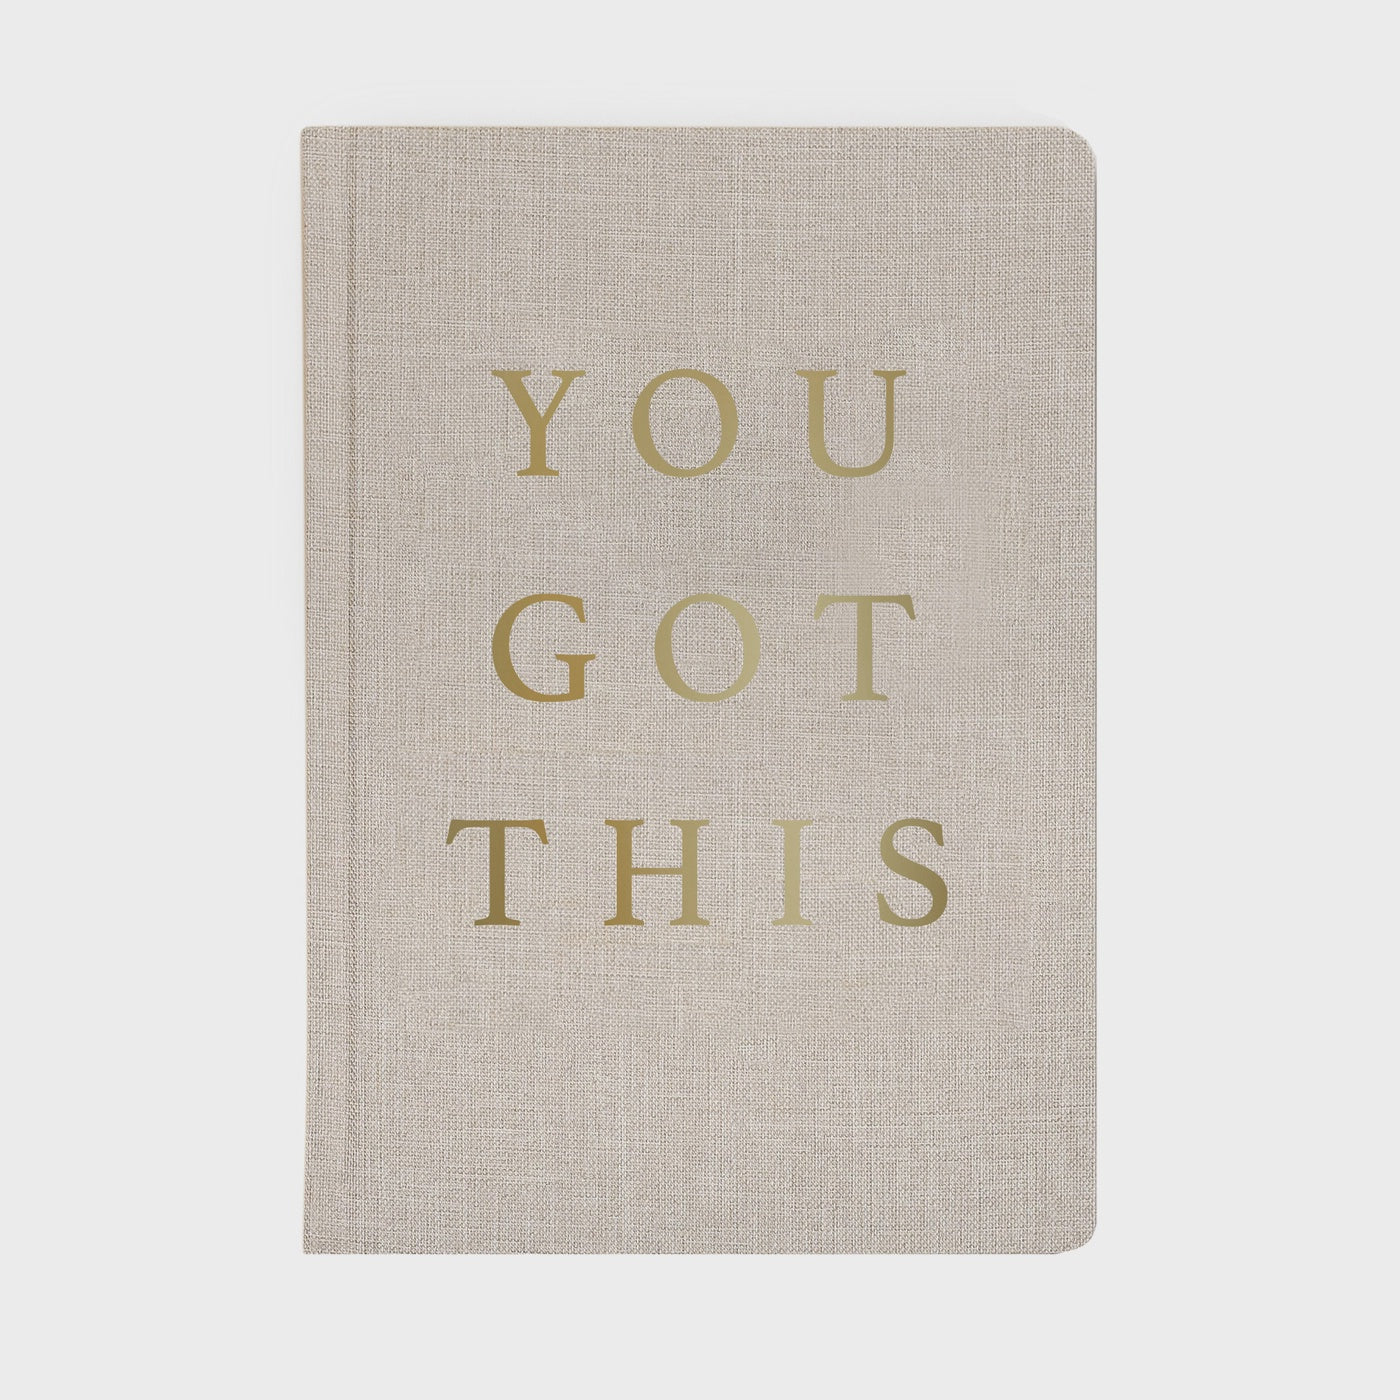 The You Got This Notebook